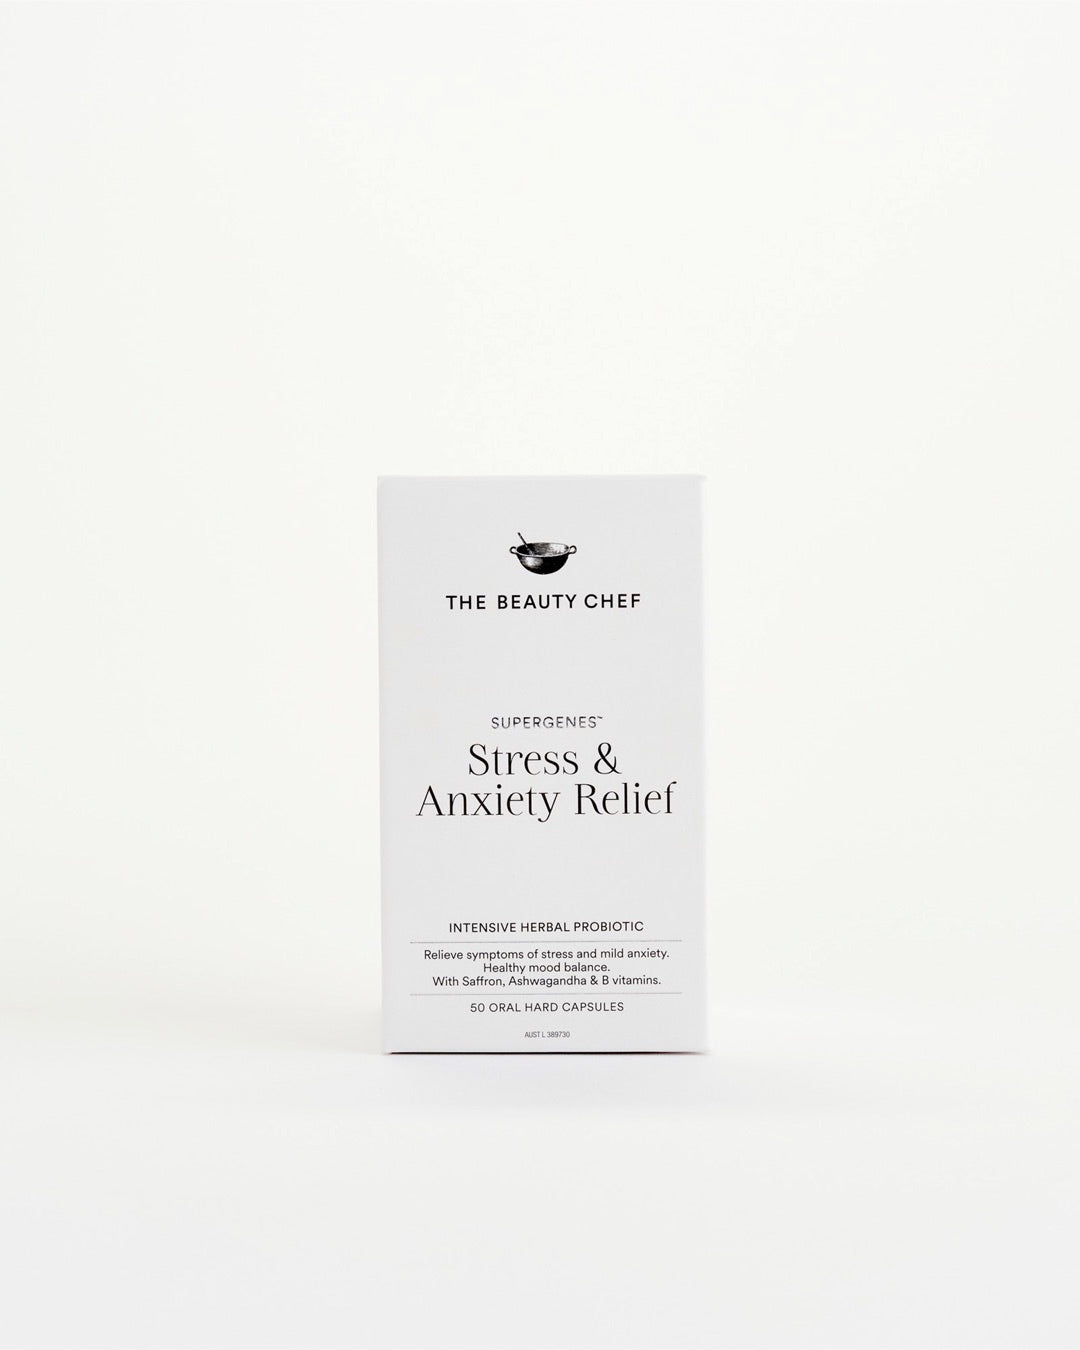 Supergenes™ Stress & Anxiety Relief Supplements by The Beauty Chef - Prae Store